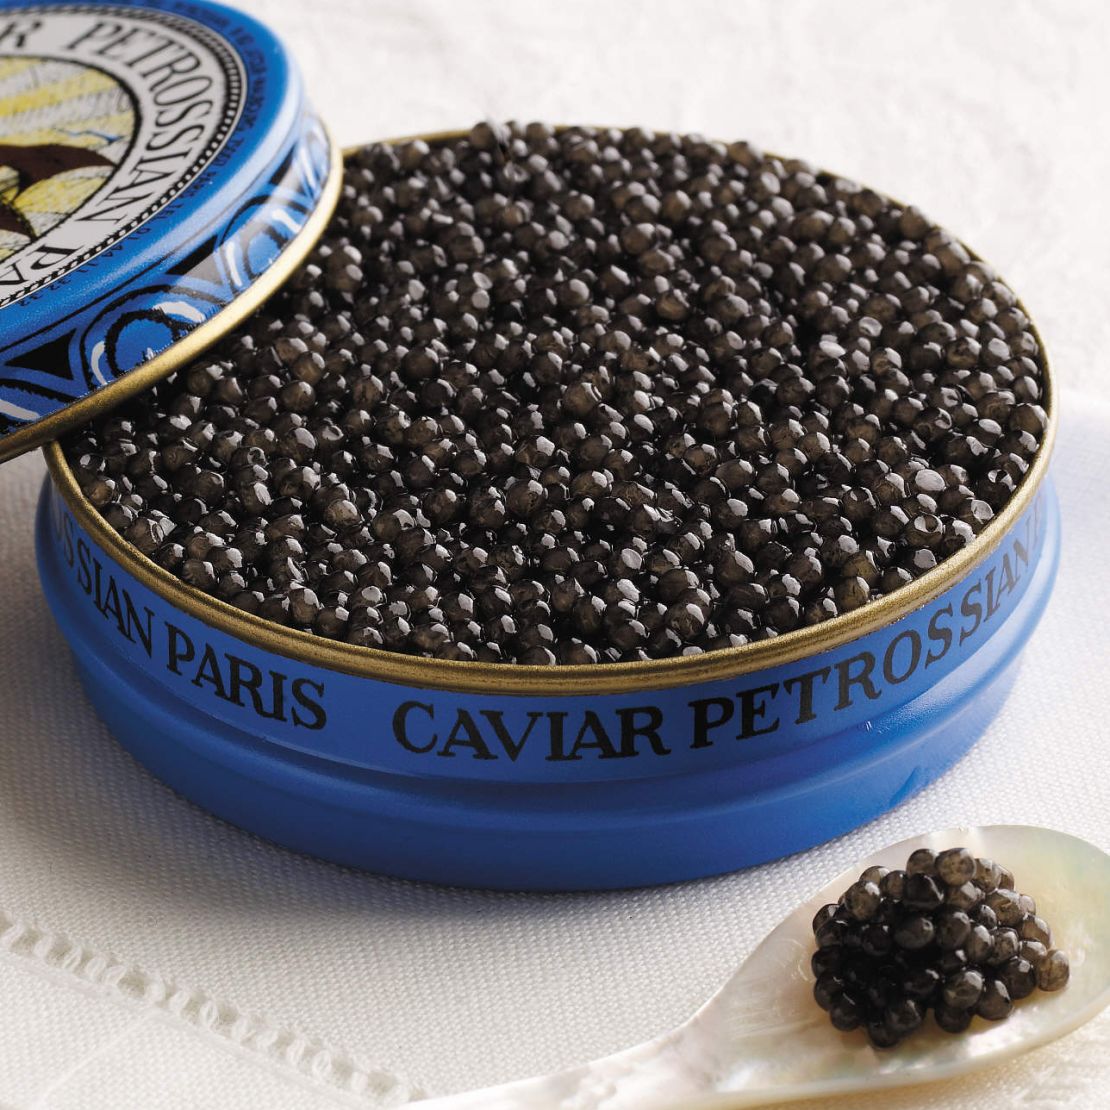 Forget cost. It's all about sharing the caviar experience with someone special, says Petrossian. 